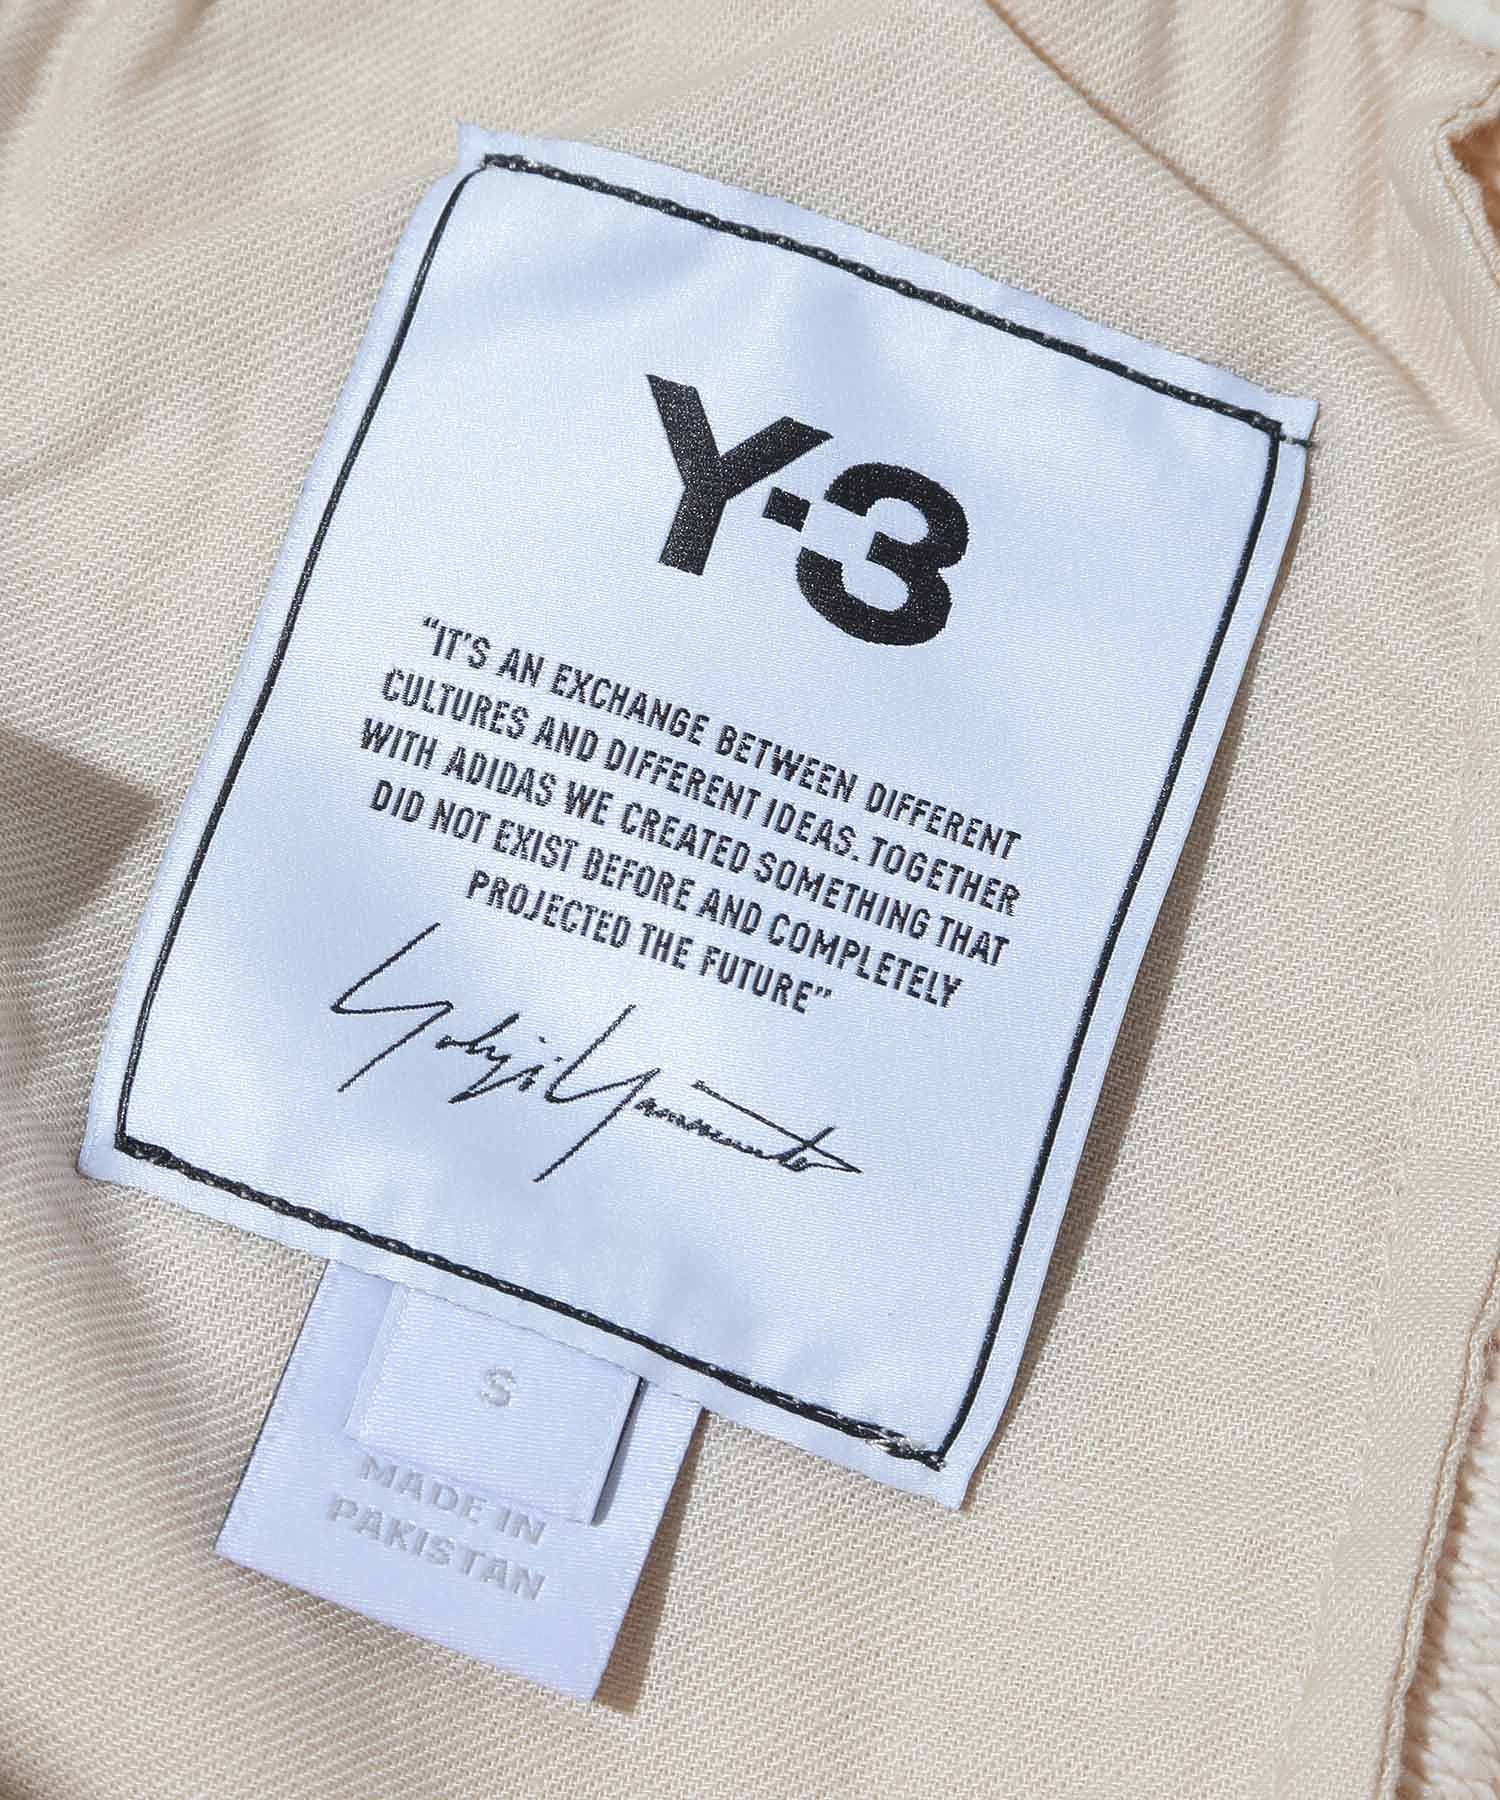 Y-3 /ワイスリー/M CLASSIC TERRY SHORTS HG6207